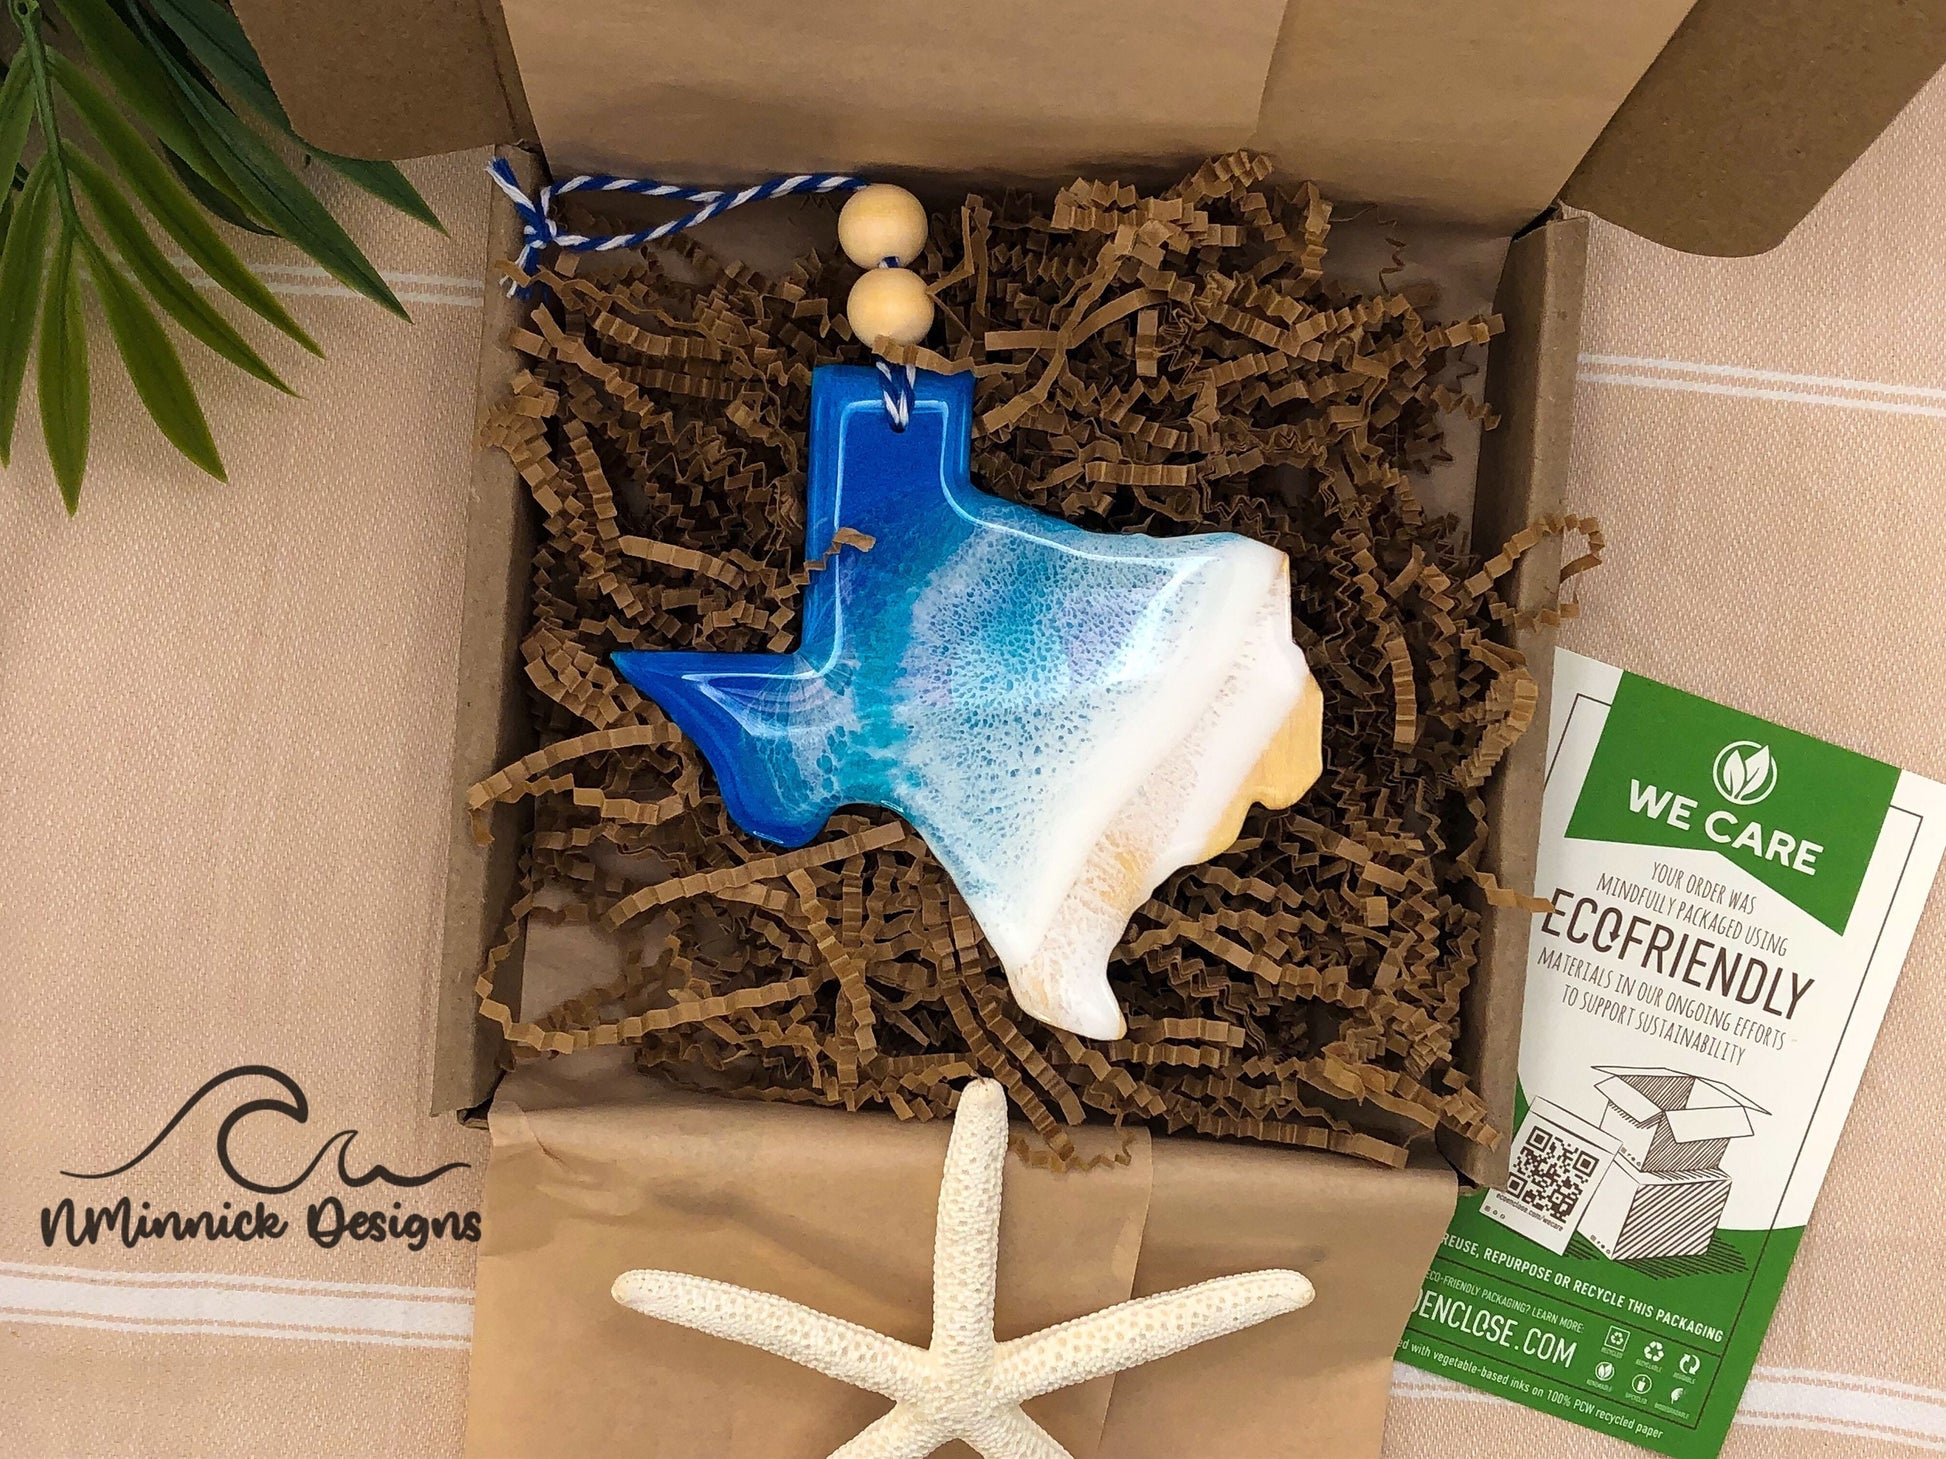 Texas Beach ornament packaged in ecofriendly plastic free materials with recyclable box, tissue paper and paper shred.